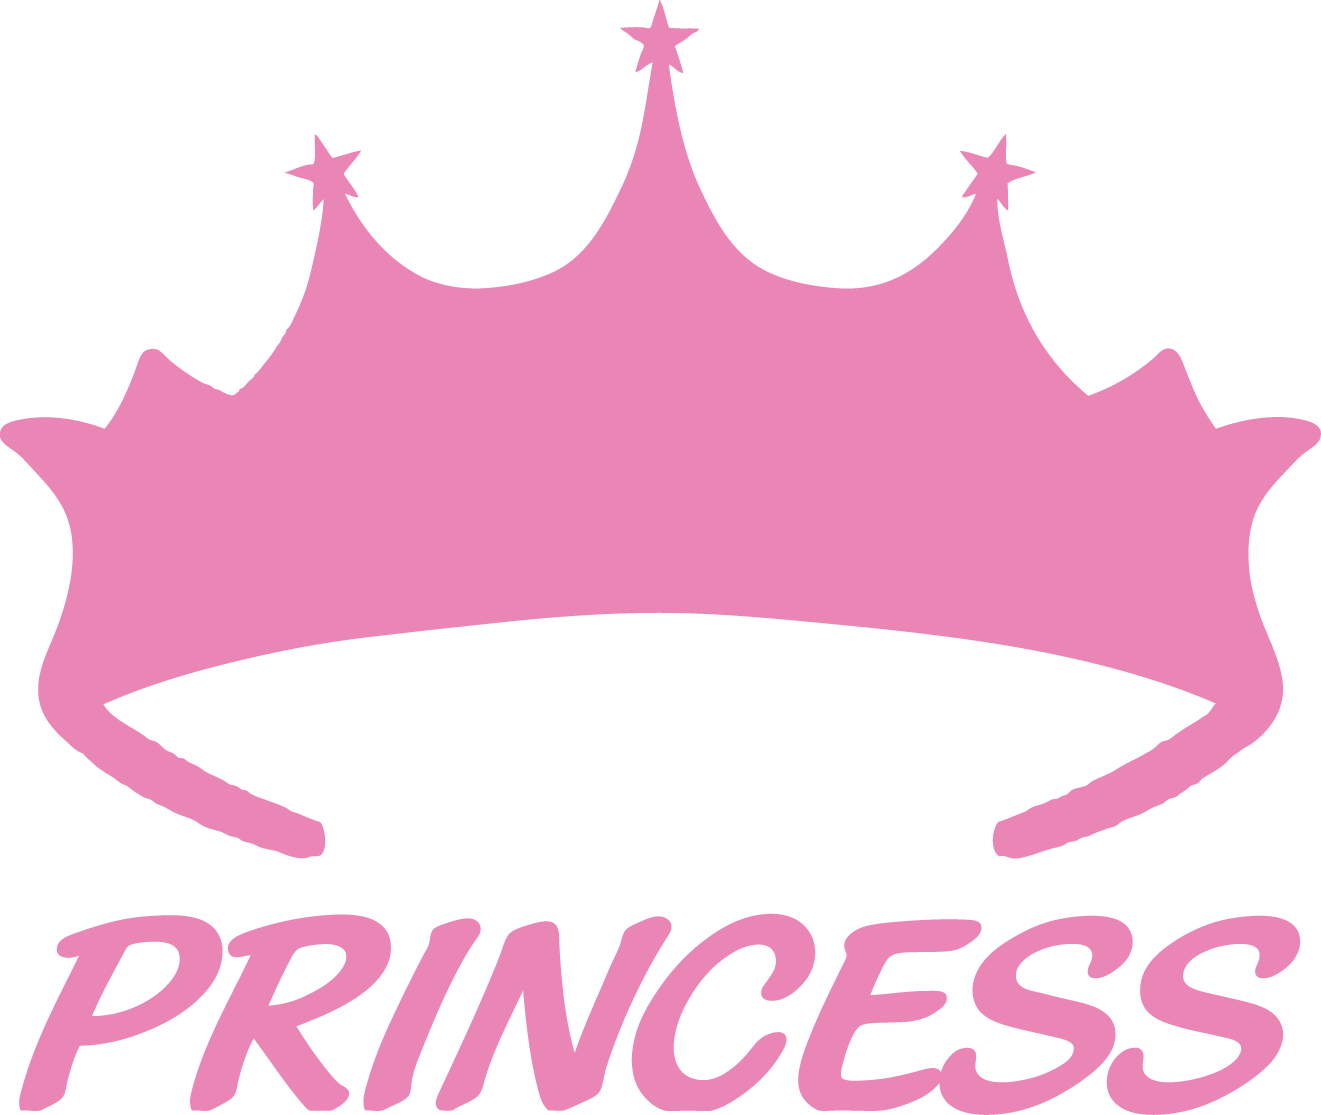 clipart of a princess crown - photo #28